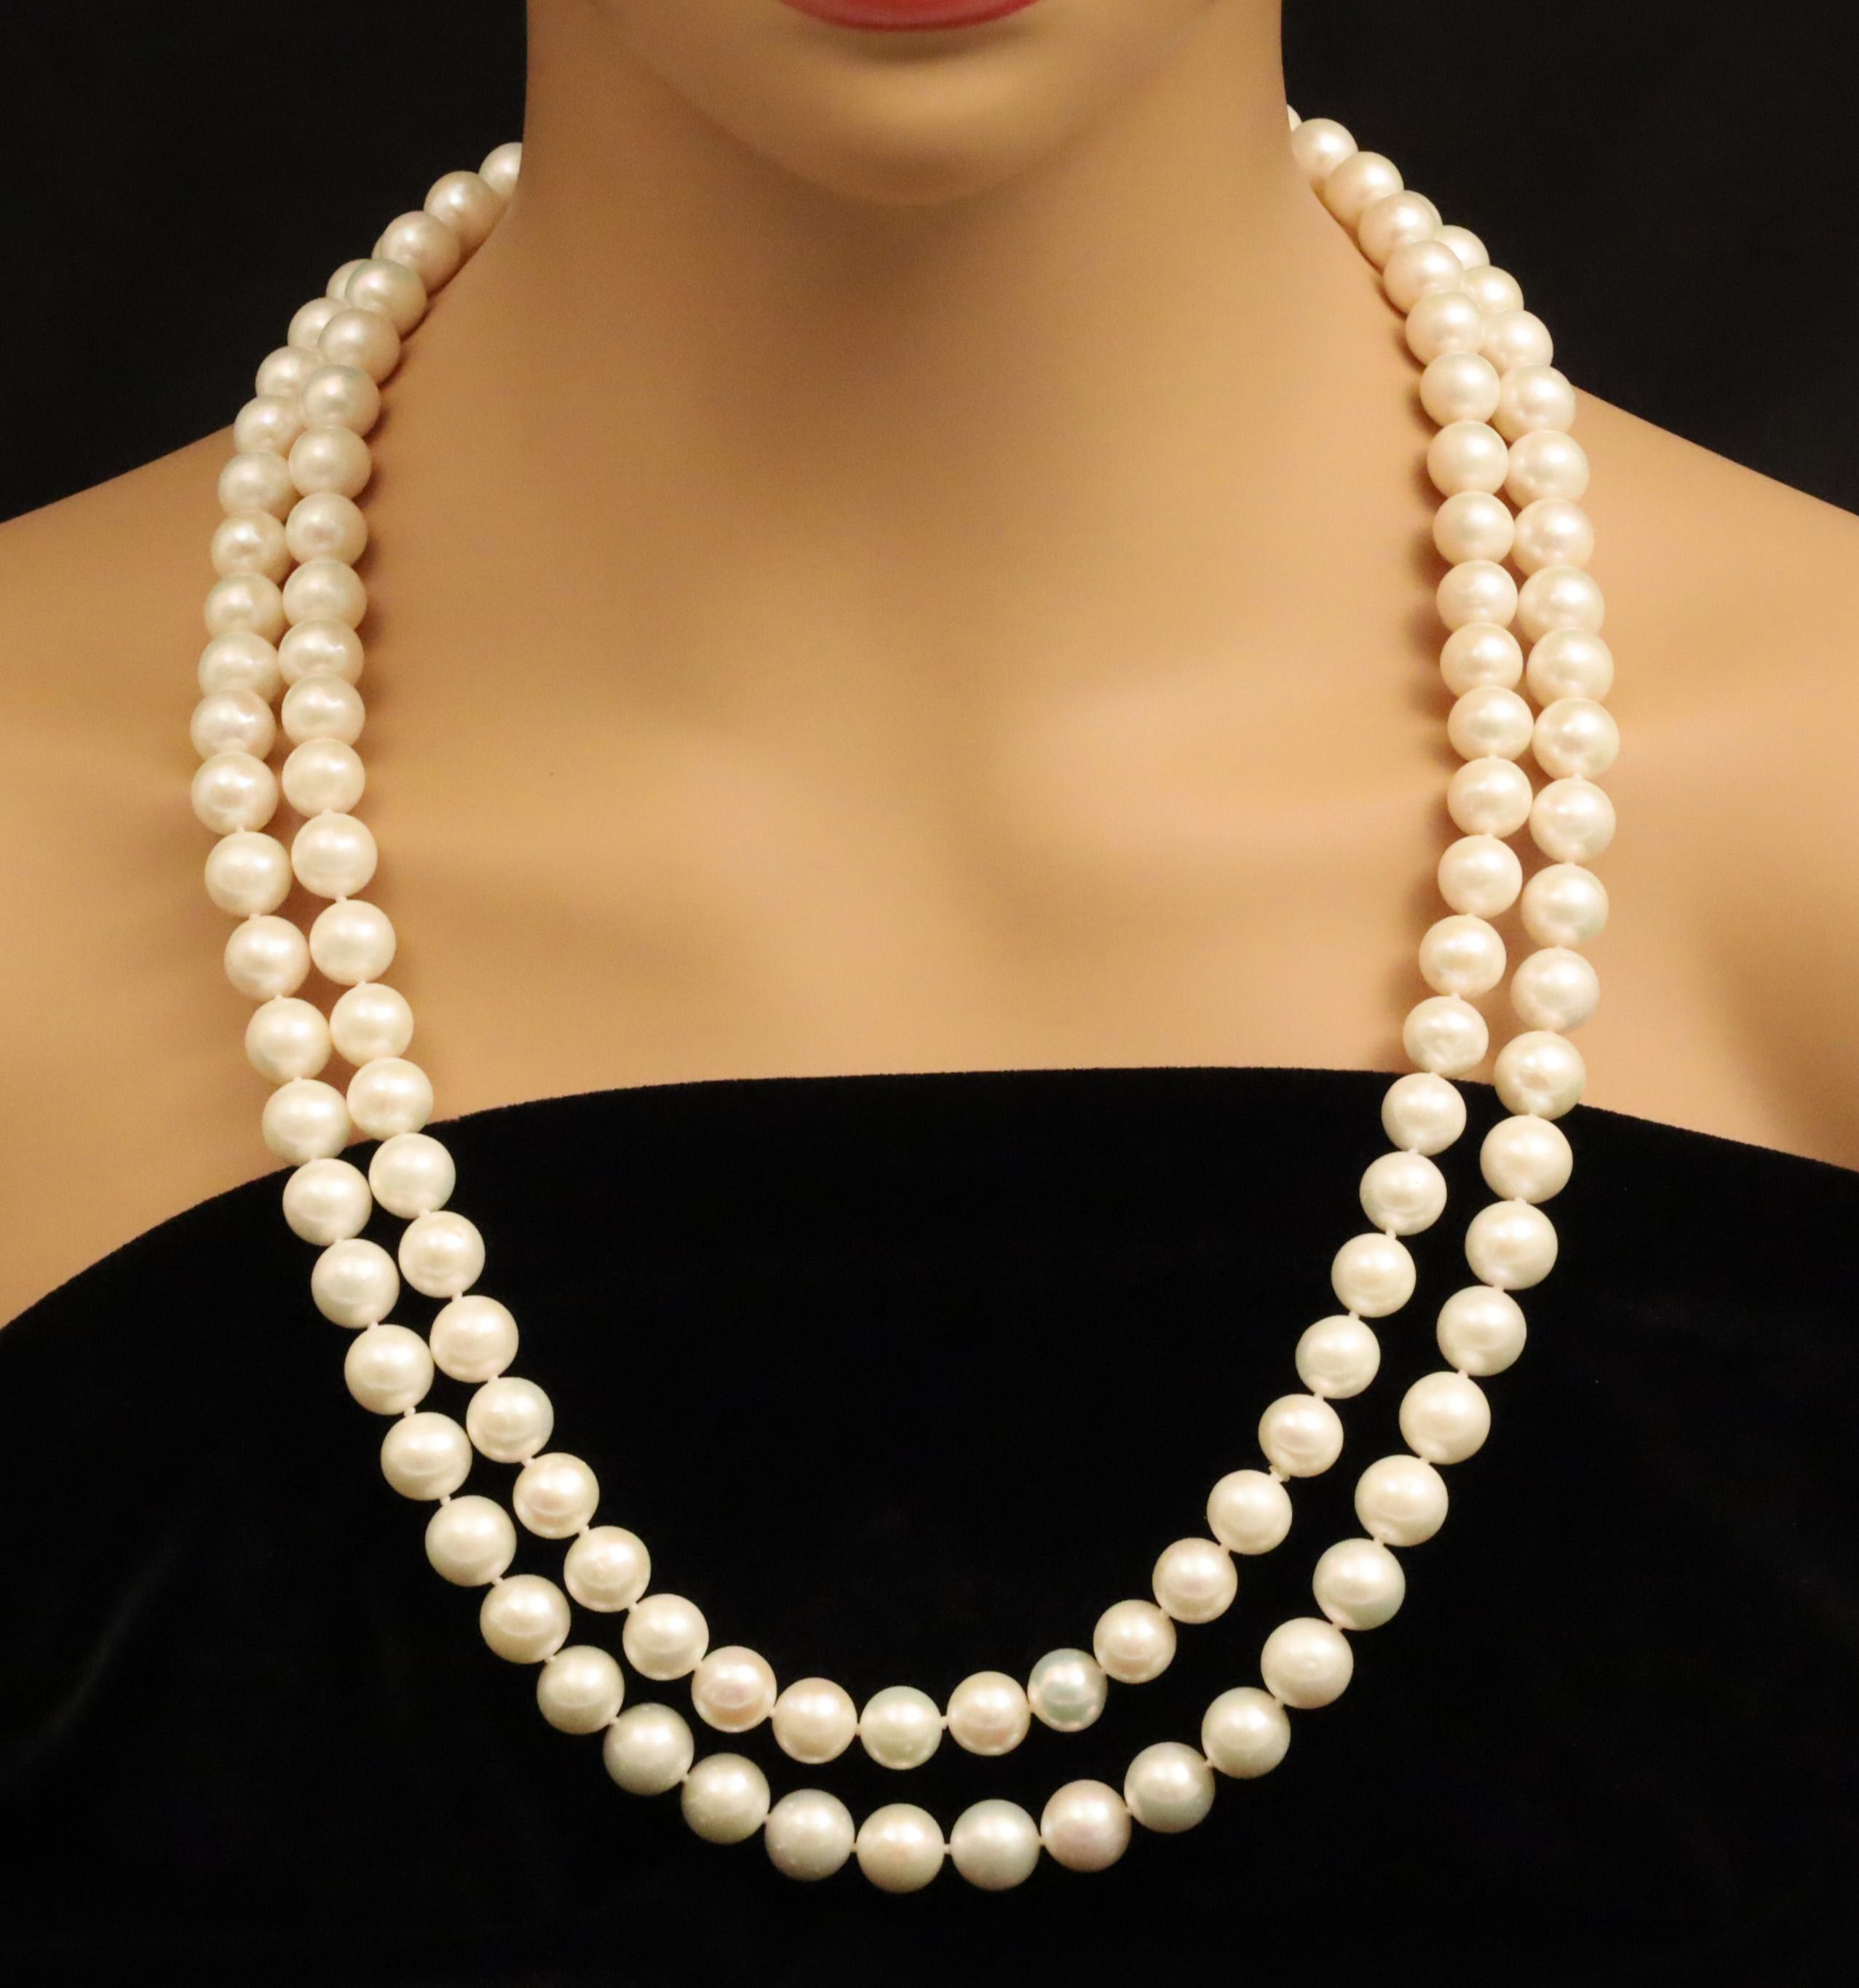 60 CONTINUOUS STRAND OF PEARLS  2f8ea4